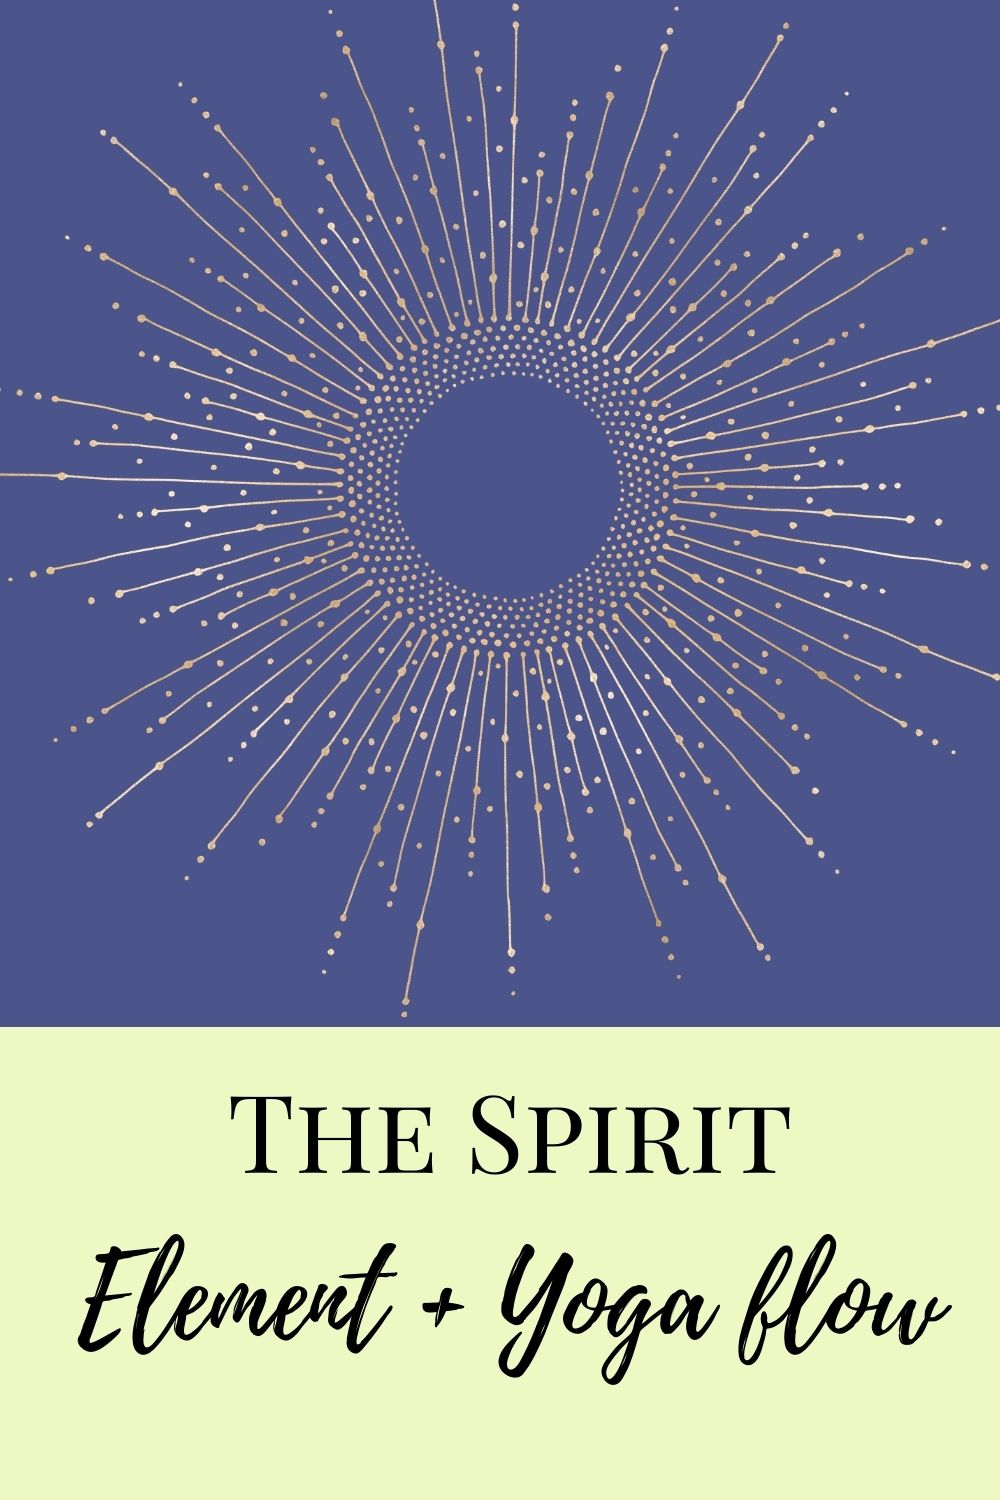 The Spirit or Aether Element